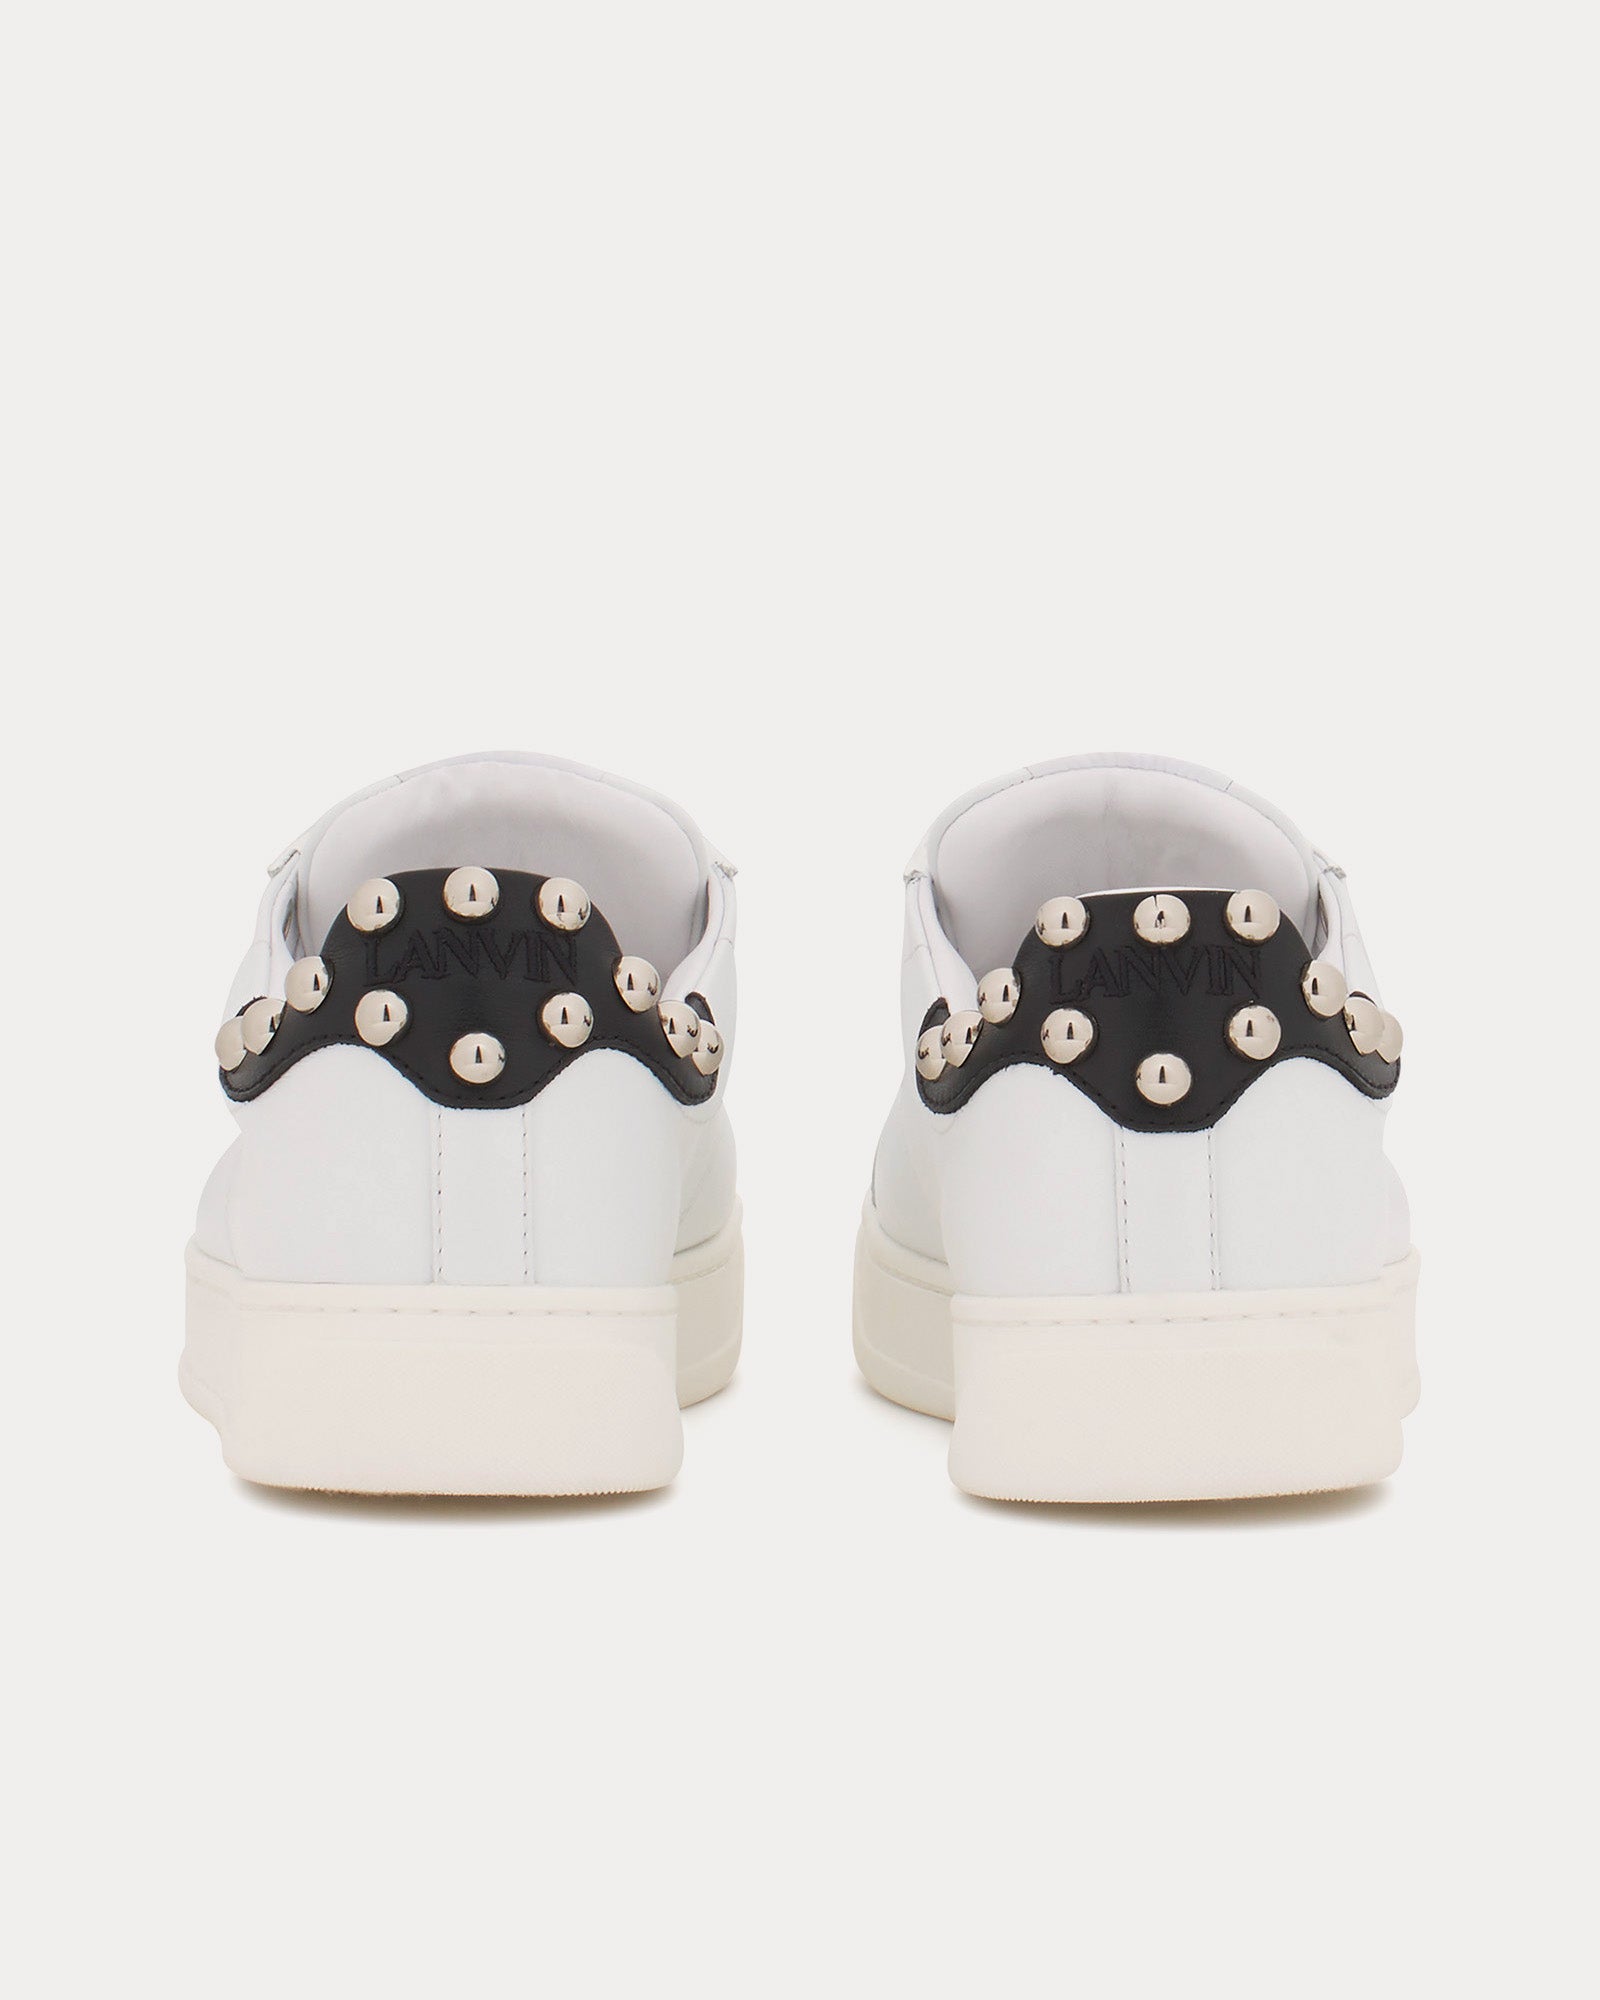 Lanvin - DDBO Studded Leather White / Silver Low Top Sneakers